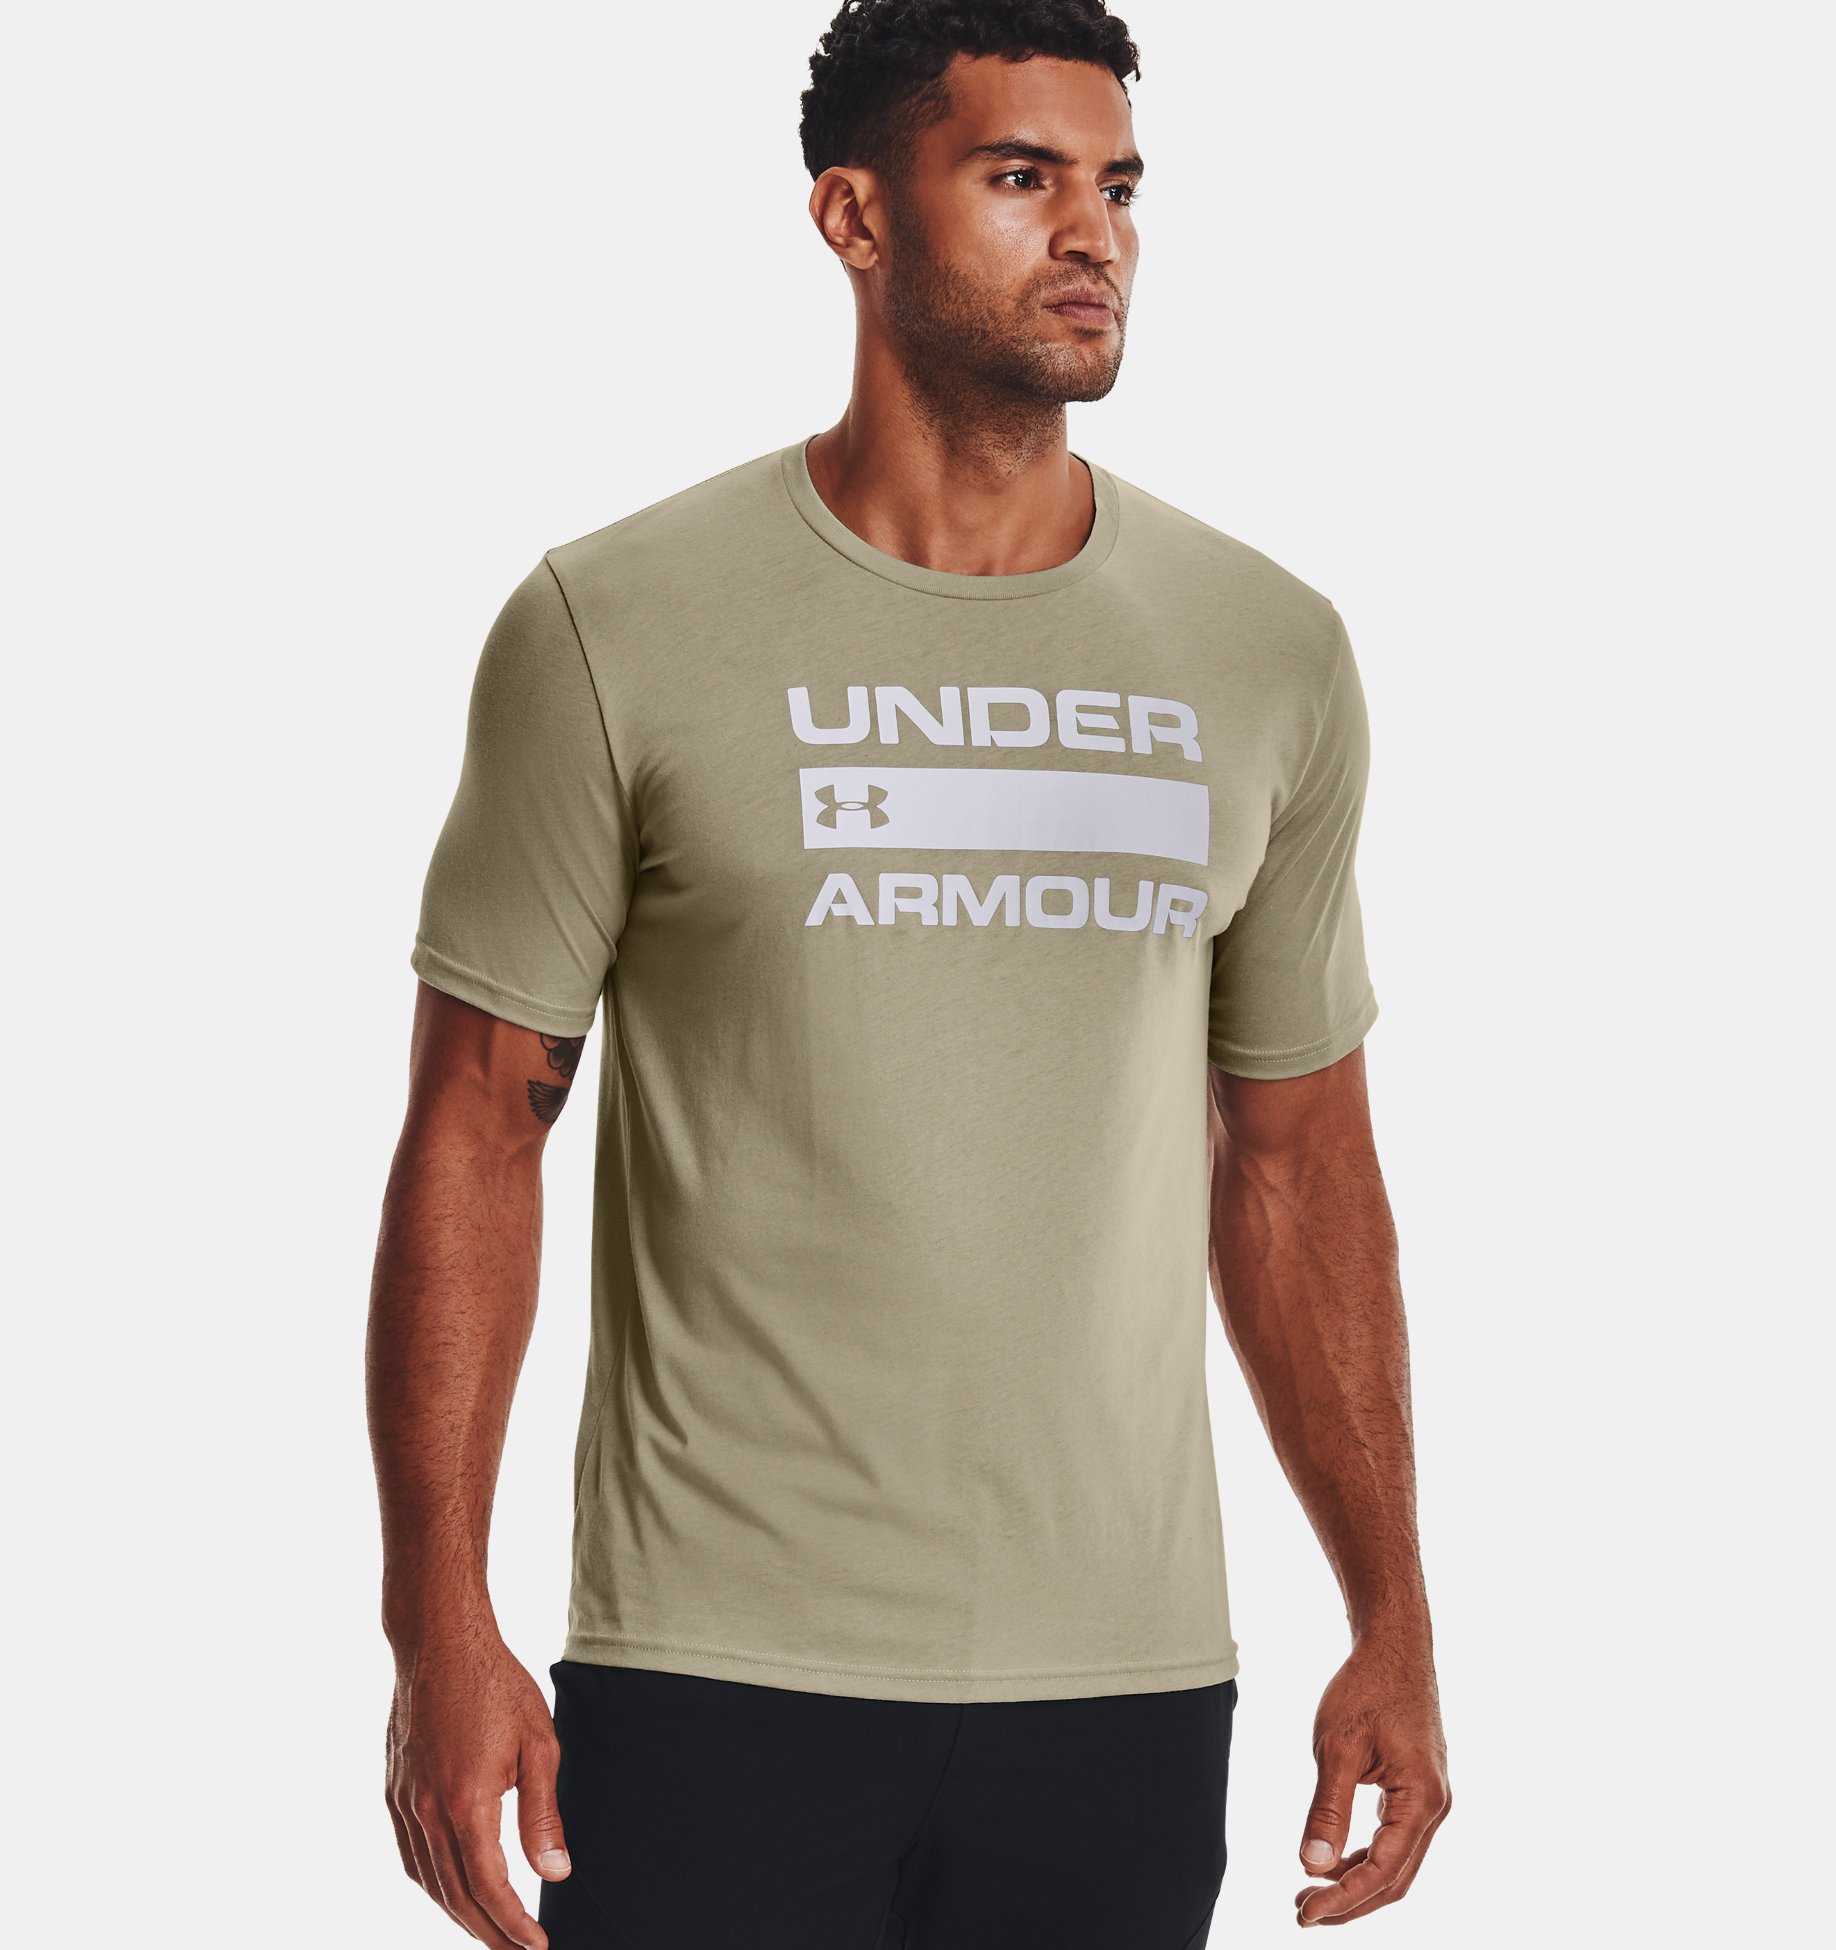 Under Armour UA TEAM ISSUE WORDMARK Short Sleeve Loose-Fit Sport and Fitness Clothing Men T Shirt for Men with Graphic Design